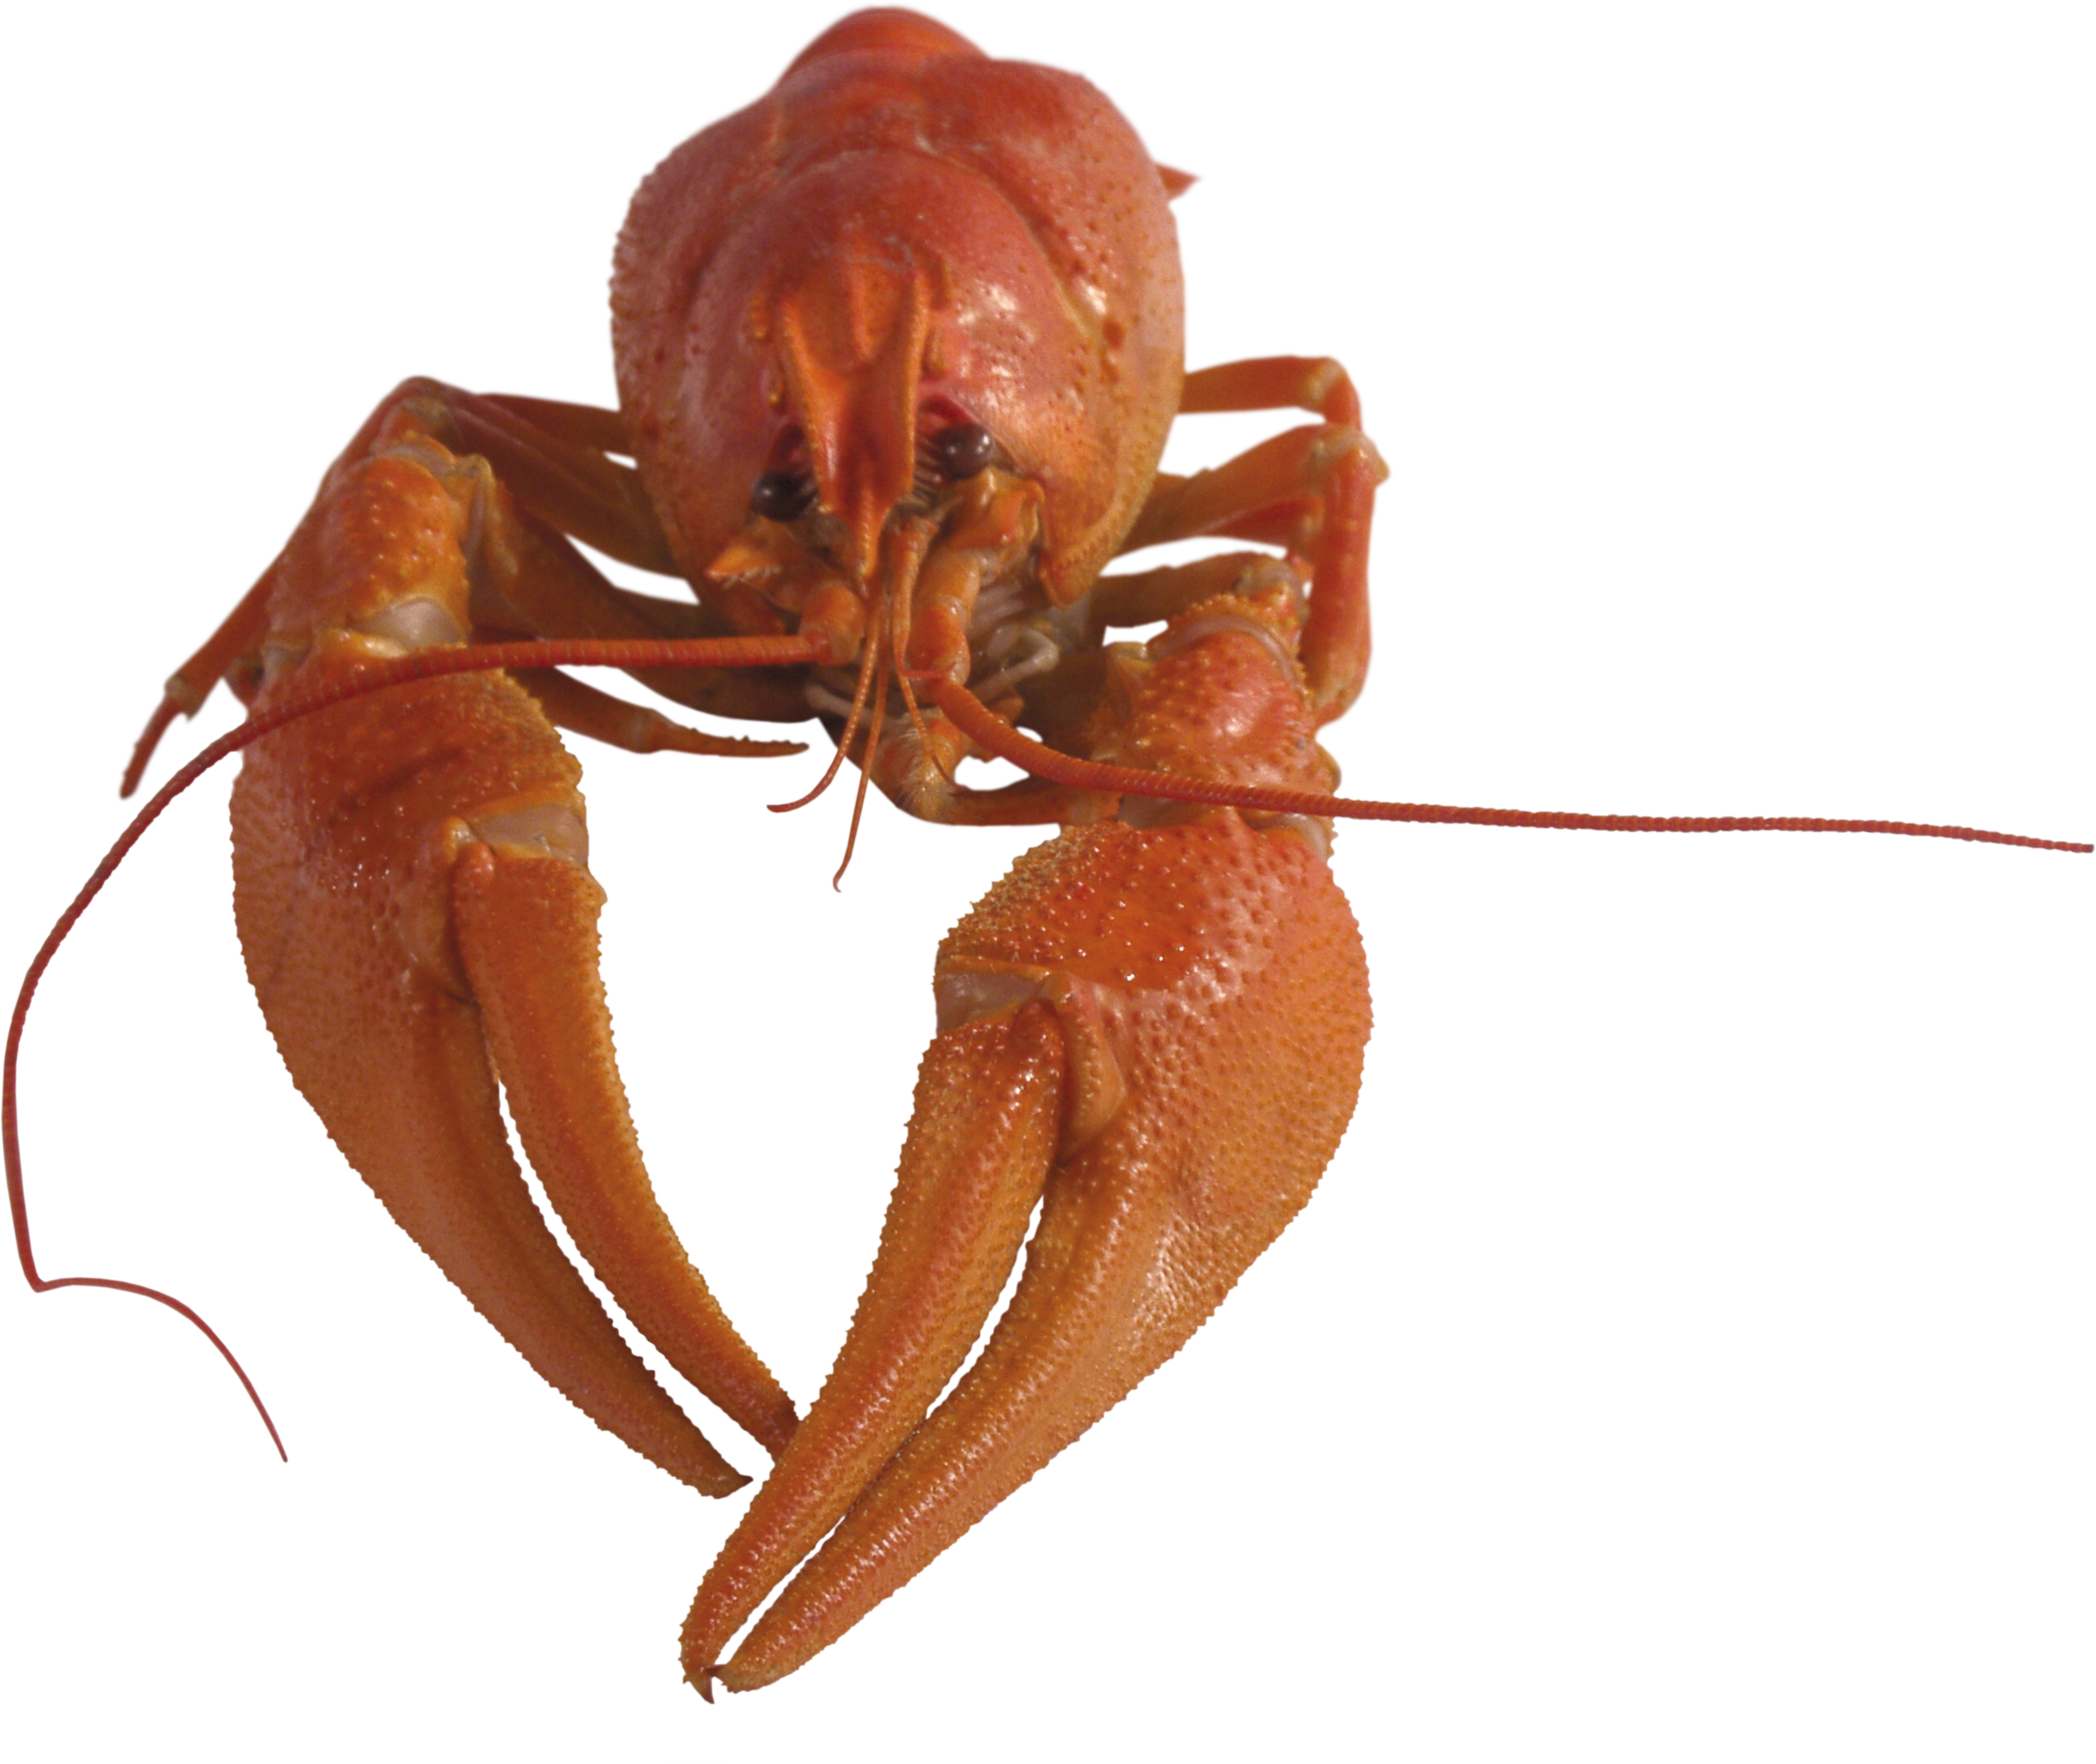 lobster clipart icon